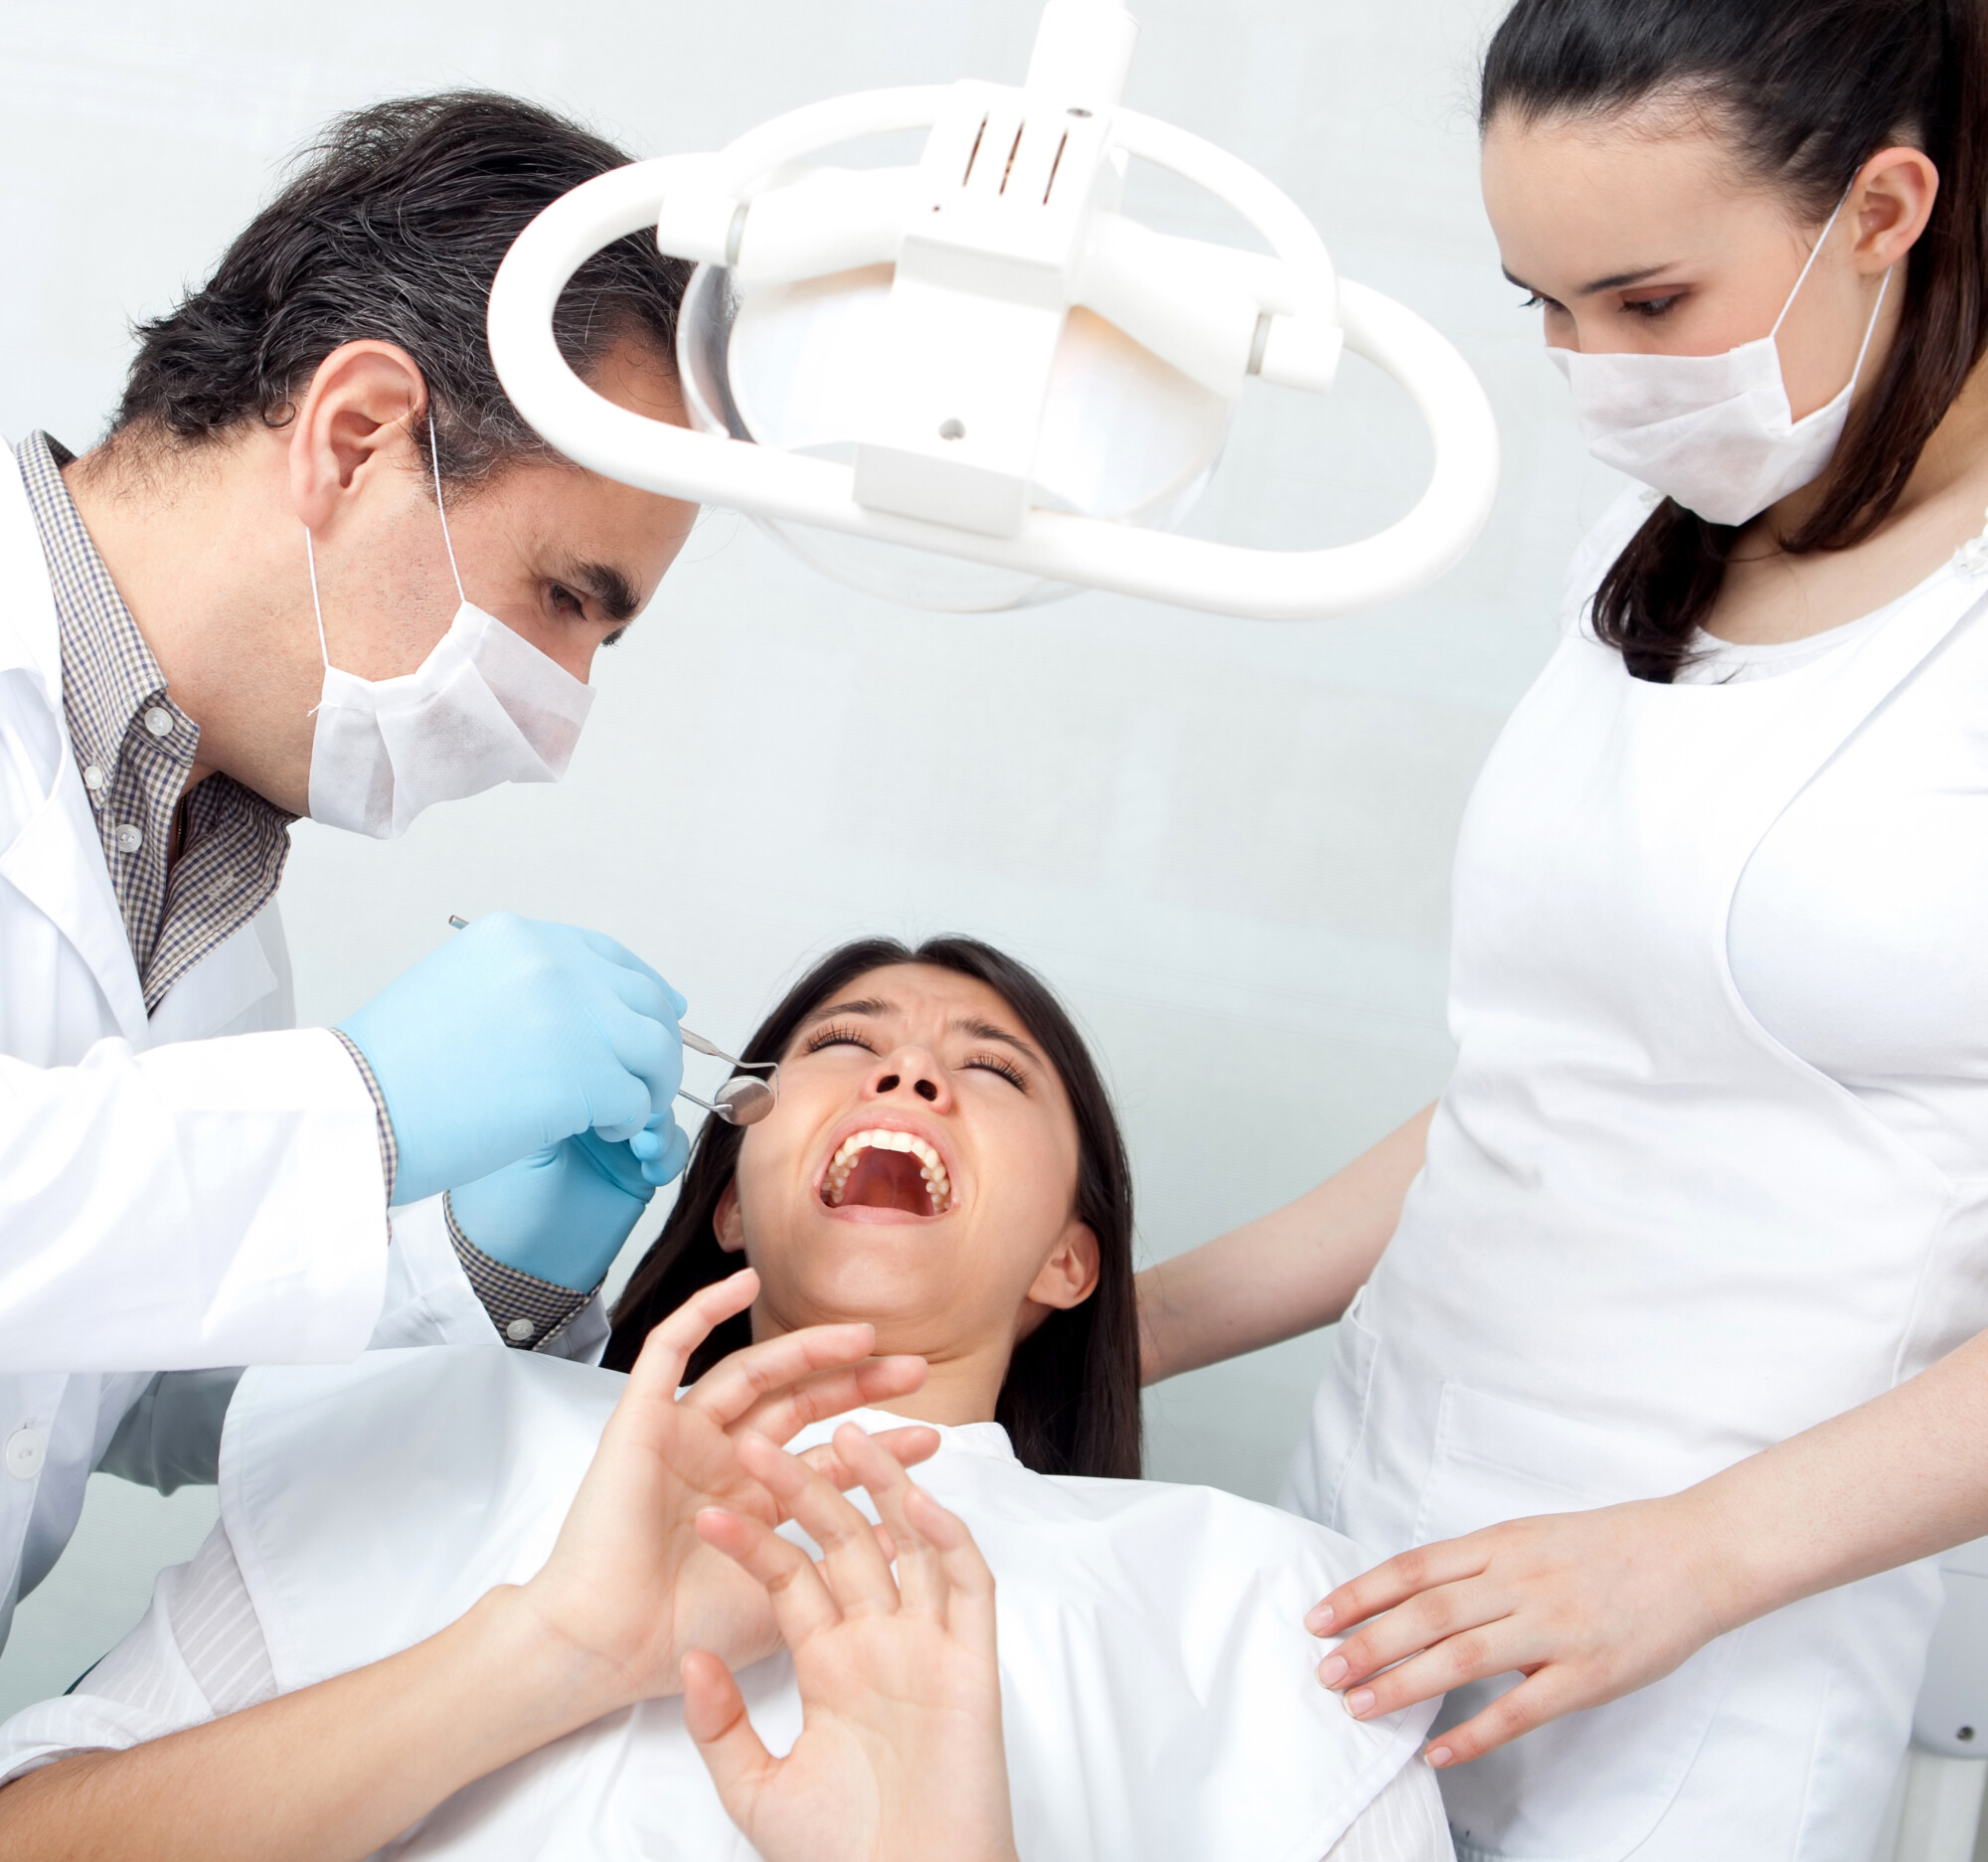 How painful is a root canal? It's widely known as one of the most undesirable, though sometimes necessary, dental treatments - click here to get the facts.